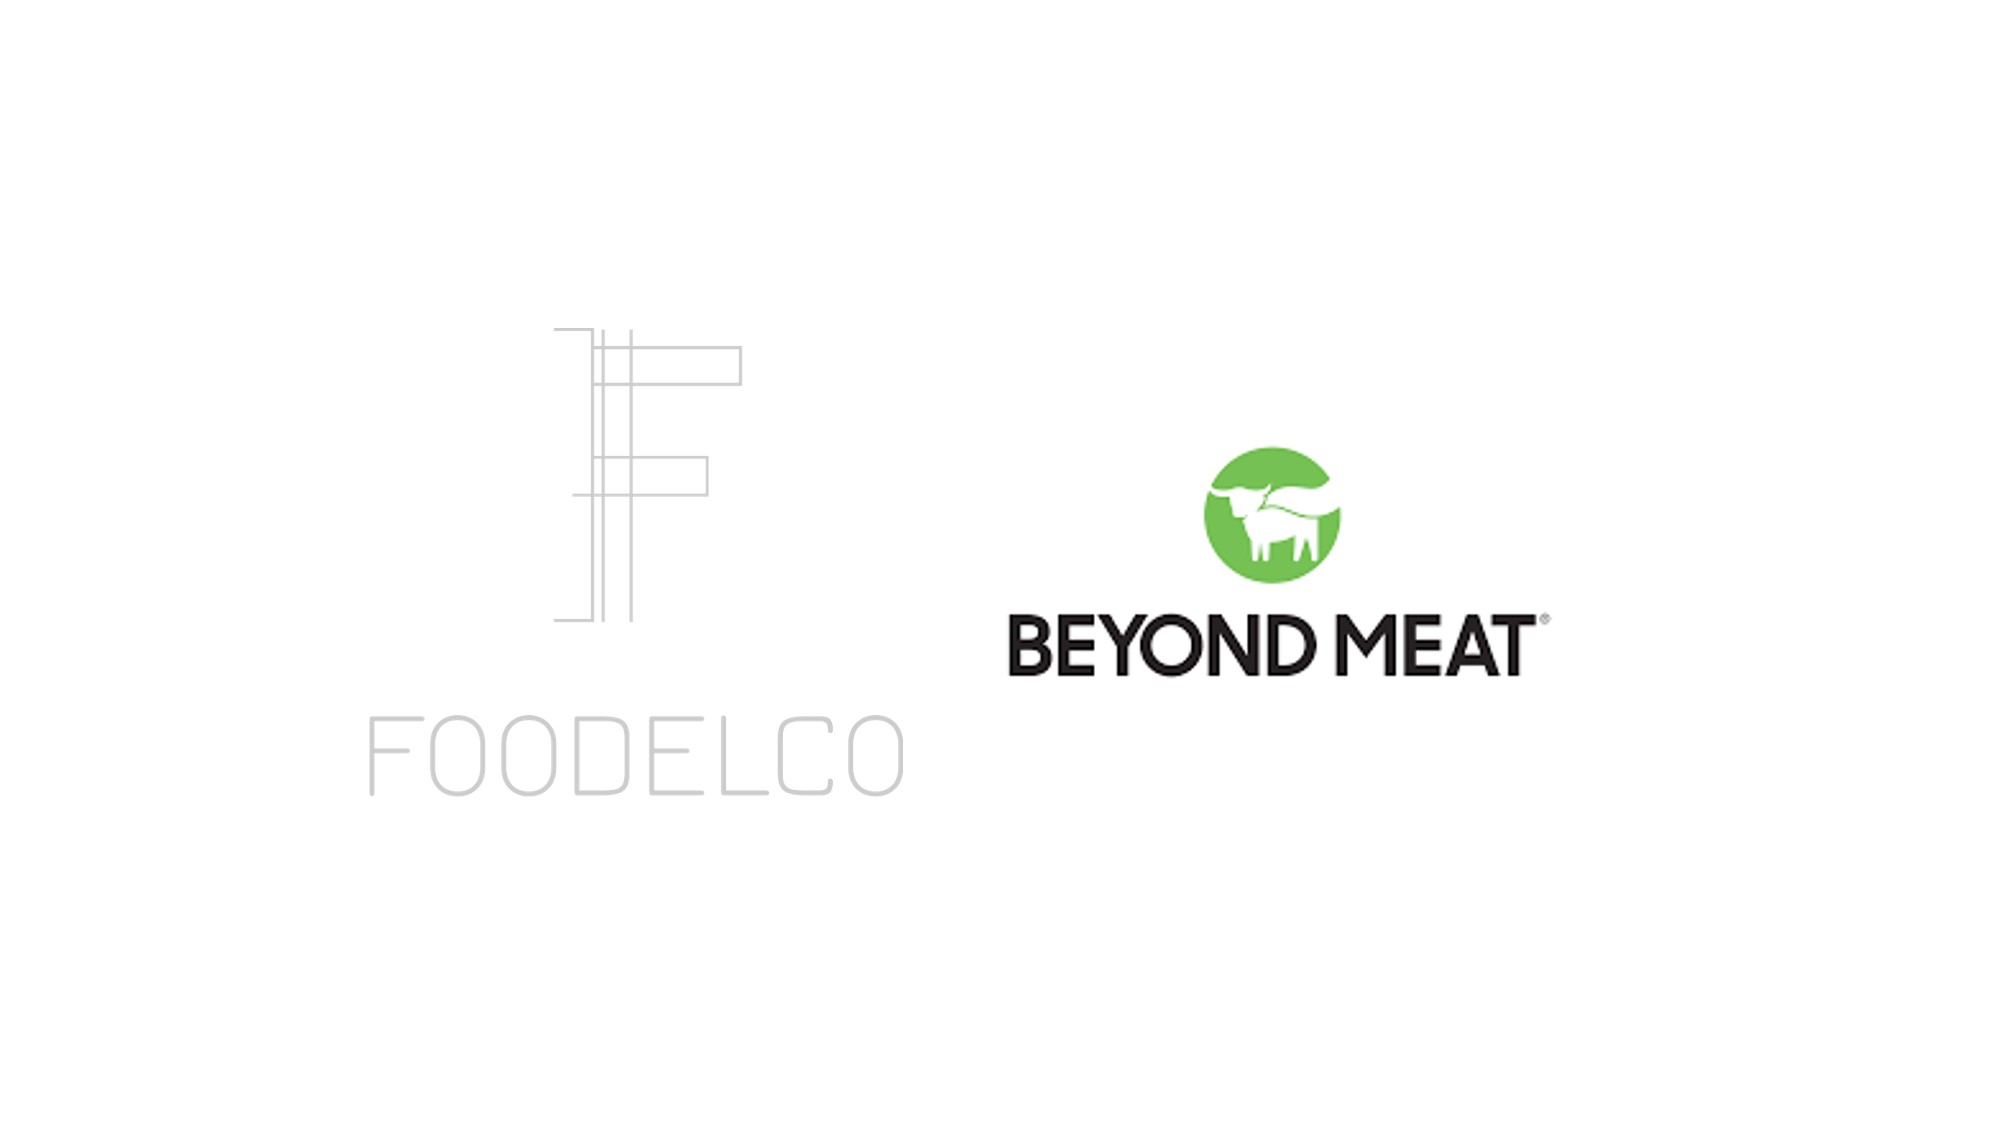 ADUS – A new partnership with Beyond Meat